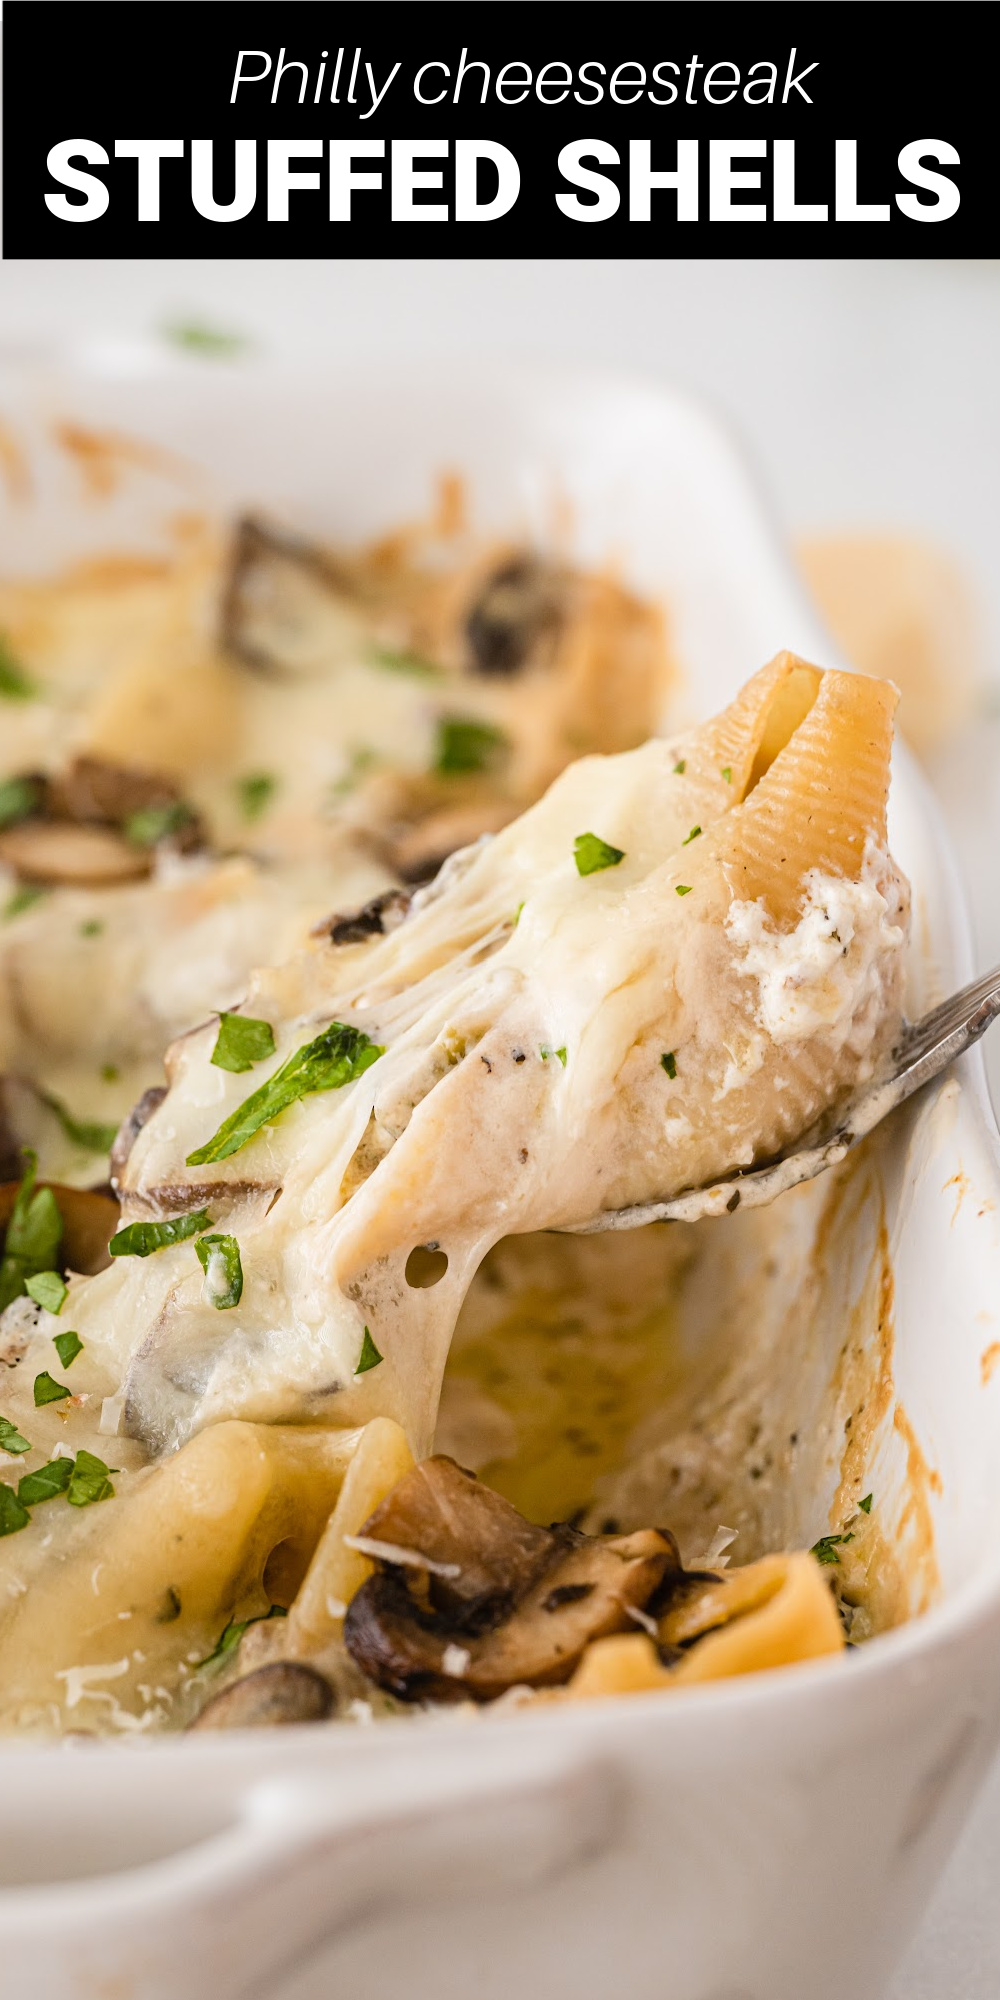 These Philly Cheesesteak Stuffed Shells are not only stunning to look at, but they are also full of incredible flavor. Jumbo pasta shells are stuffed with perfectly seasoned beef and cheese, then topped with a rich and decadent homemade alfredo sauce! 